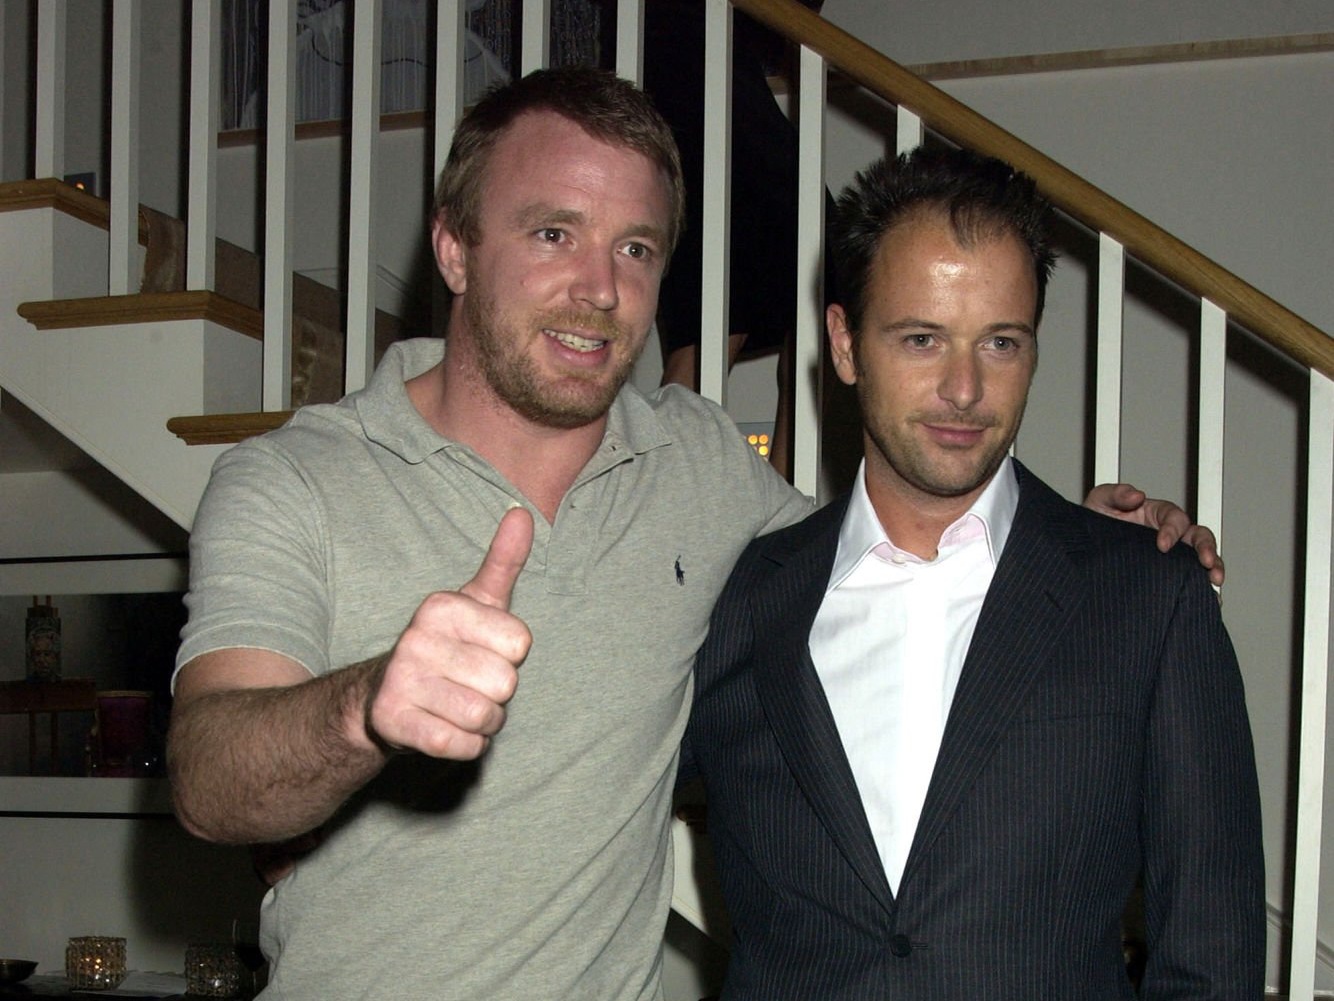 Guy Ritchie and Matthew Vaughn, the director who invited Tom Cruise to the American Buyers Screening 